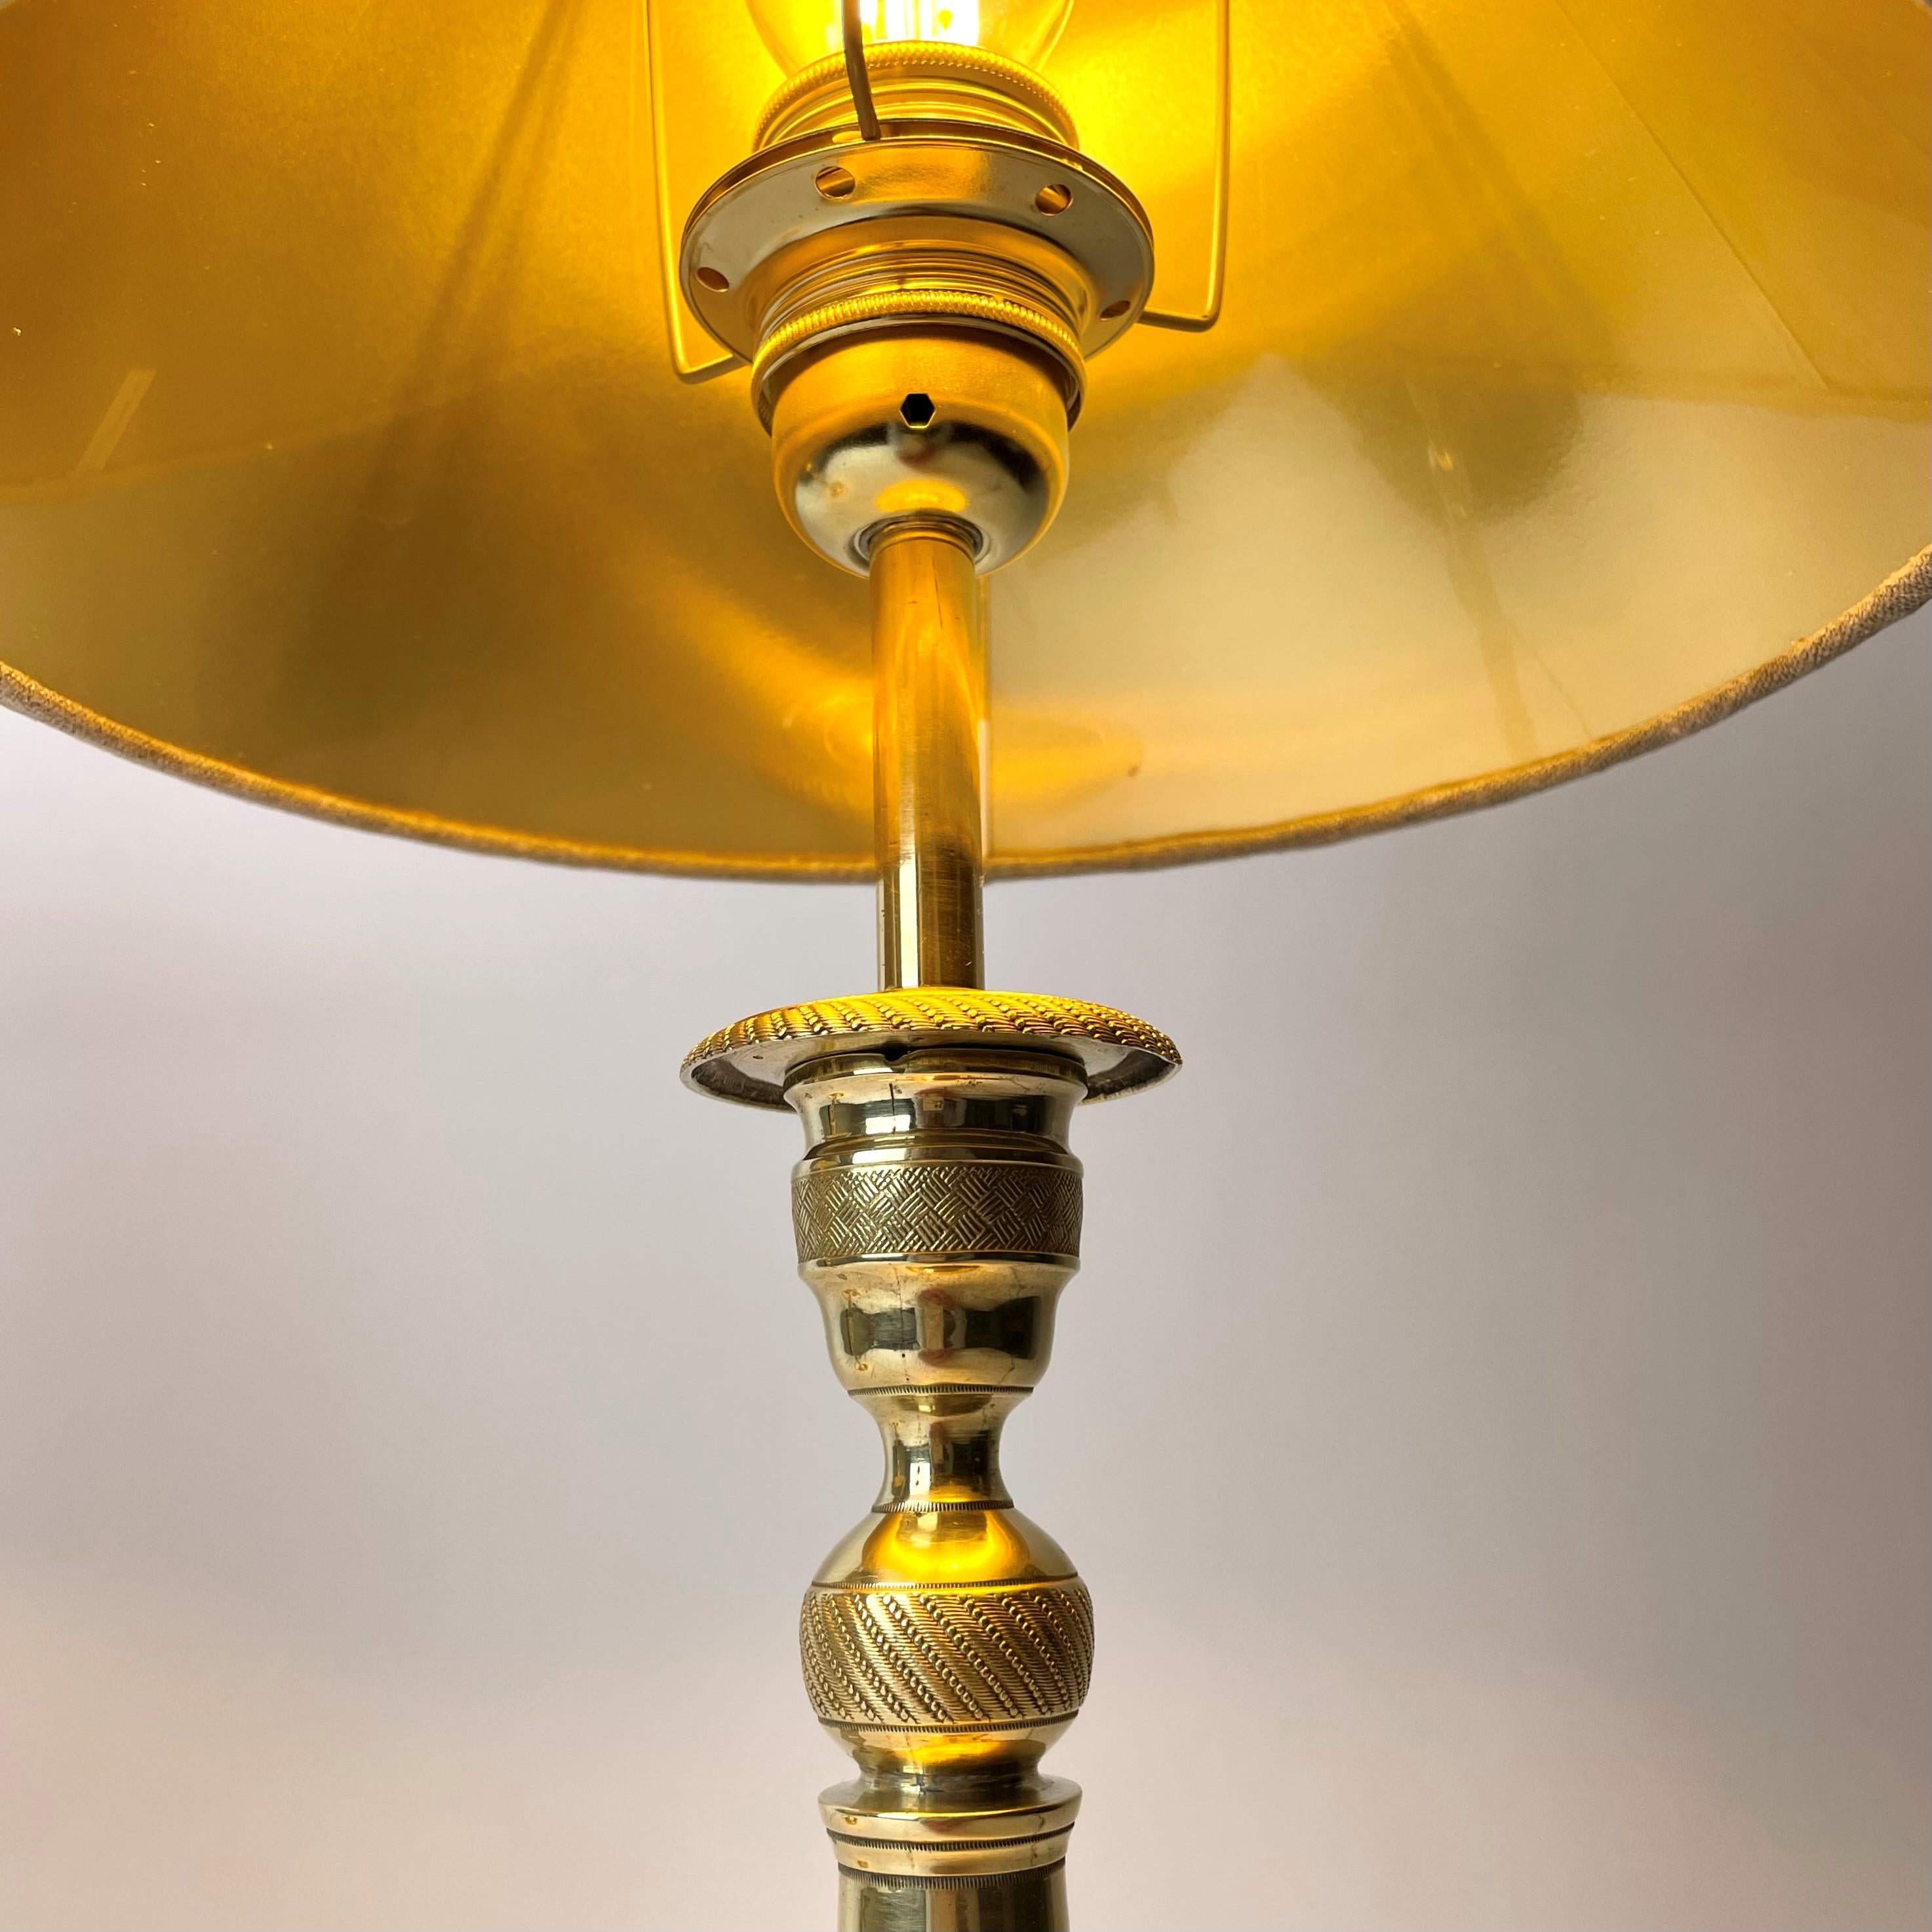 Early 19th Century Beautiful Pair of Table Lamps Originally Empire Candlesticks from the 1820s